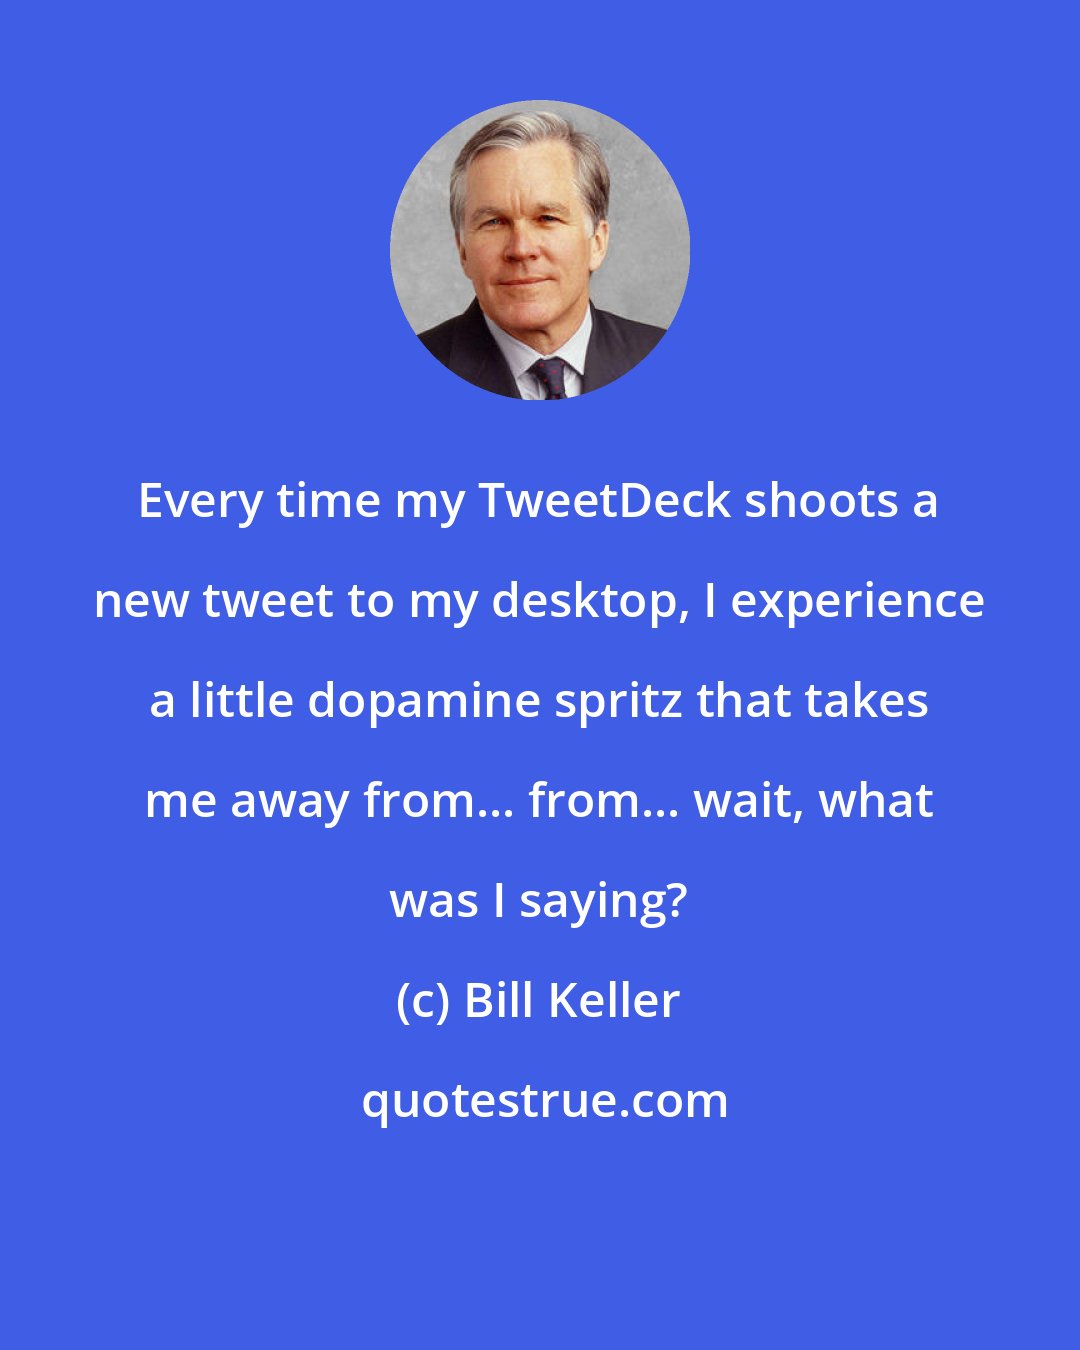 Bill Keller: Every time my TweetDeck shoots a new tweet to my desktop, I experience a little dopamine spritz that takes me away from... from... wait, what was I saying?